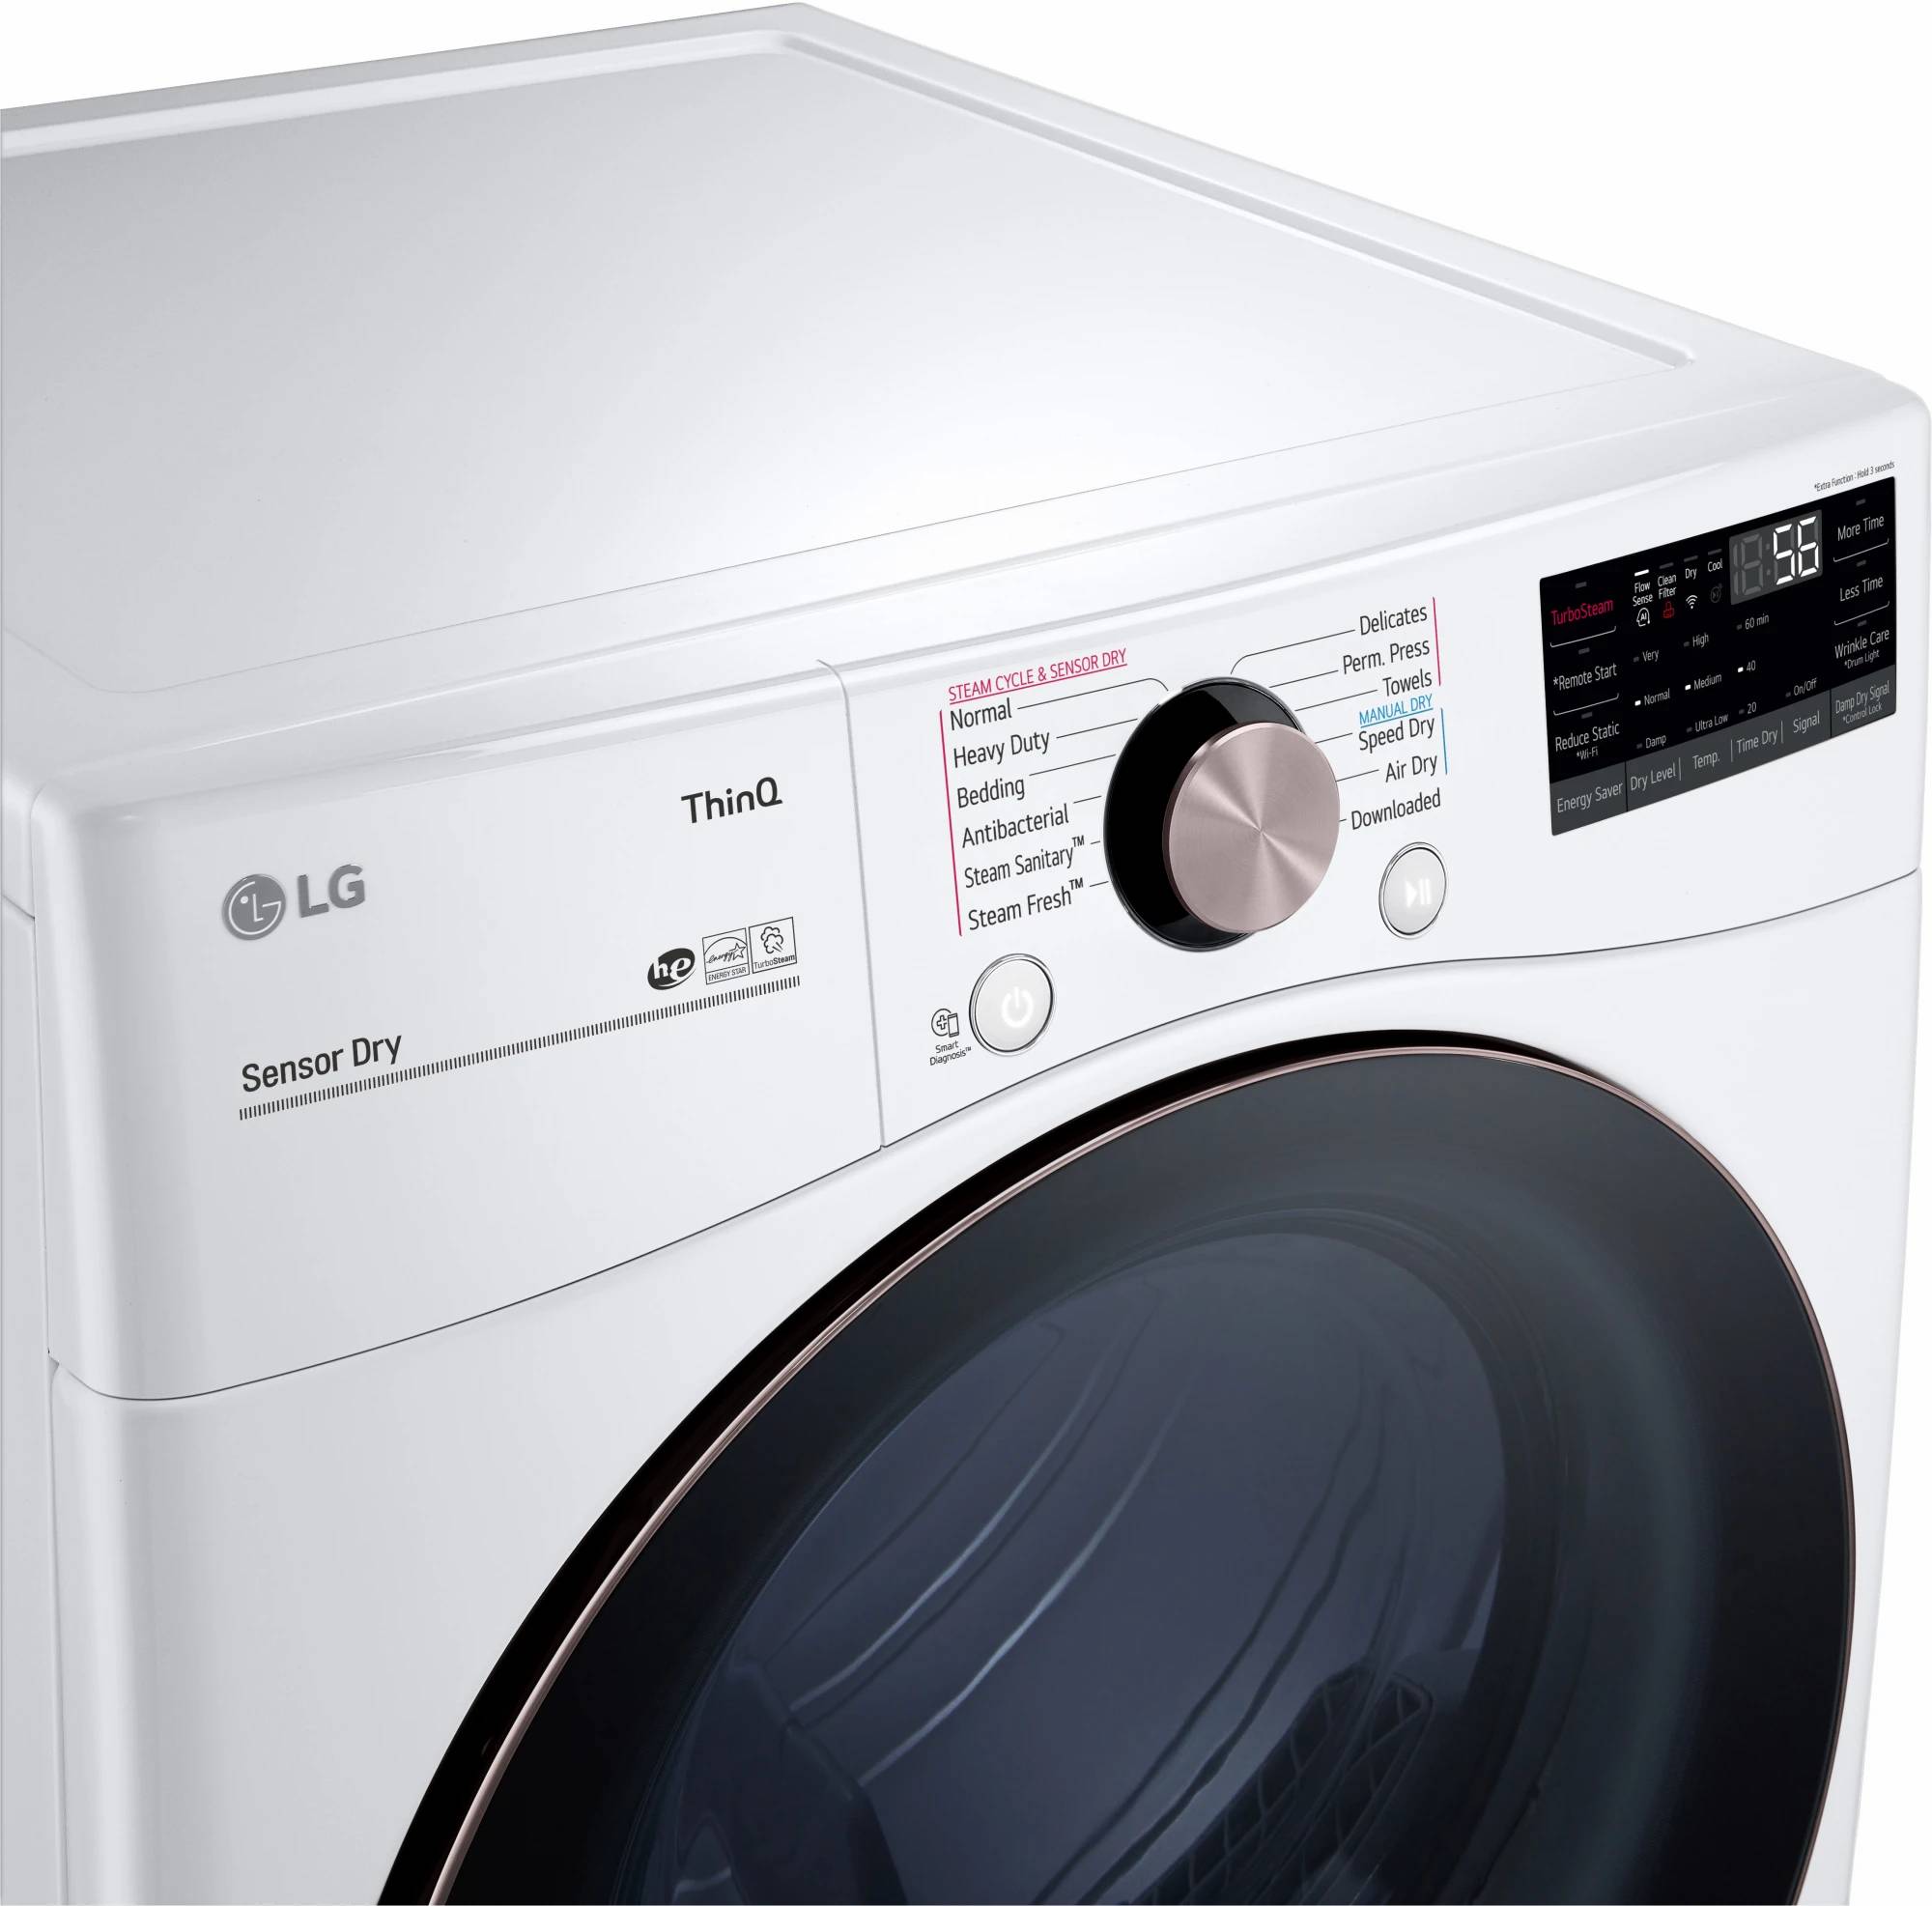 7.3 cu.ft. Smart Wi-Fi Enabled Electric Dryer with TurboSteam™